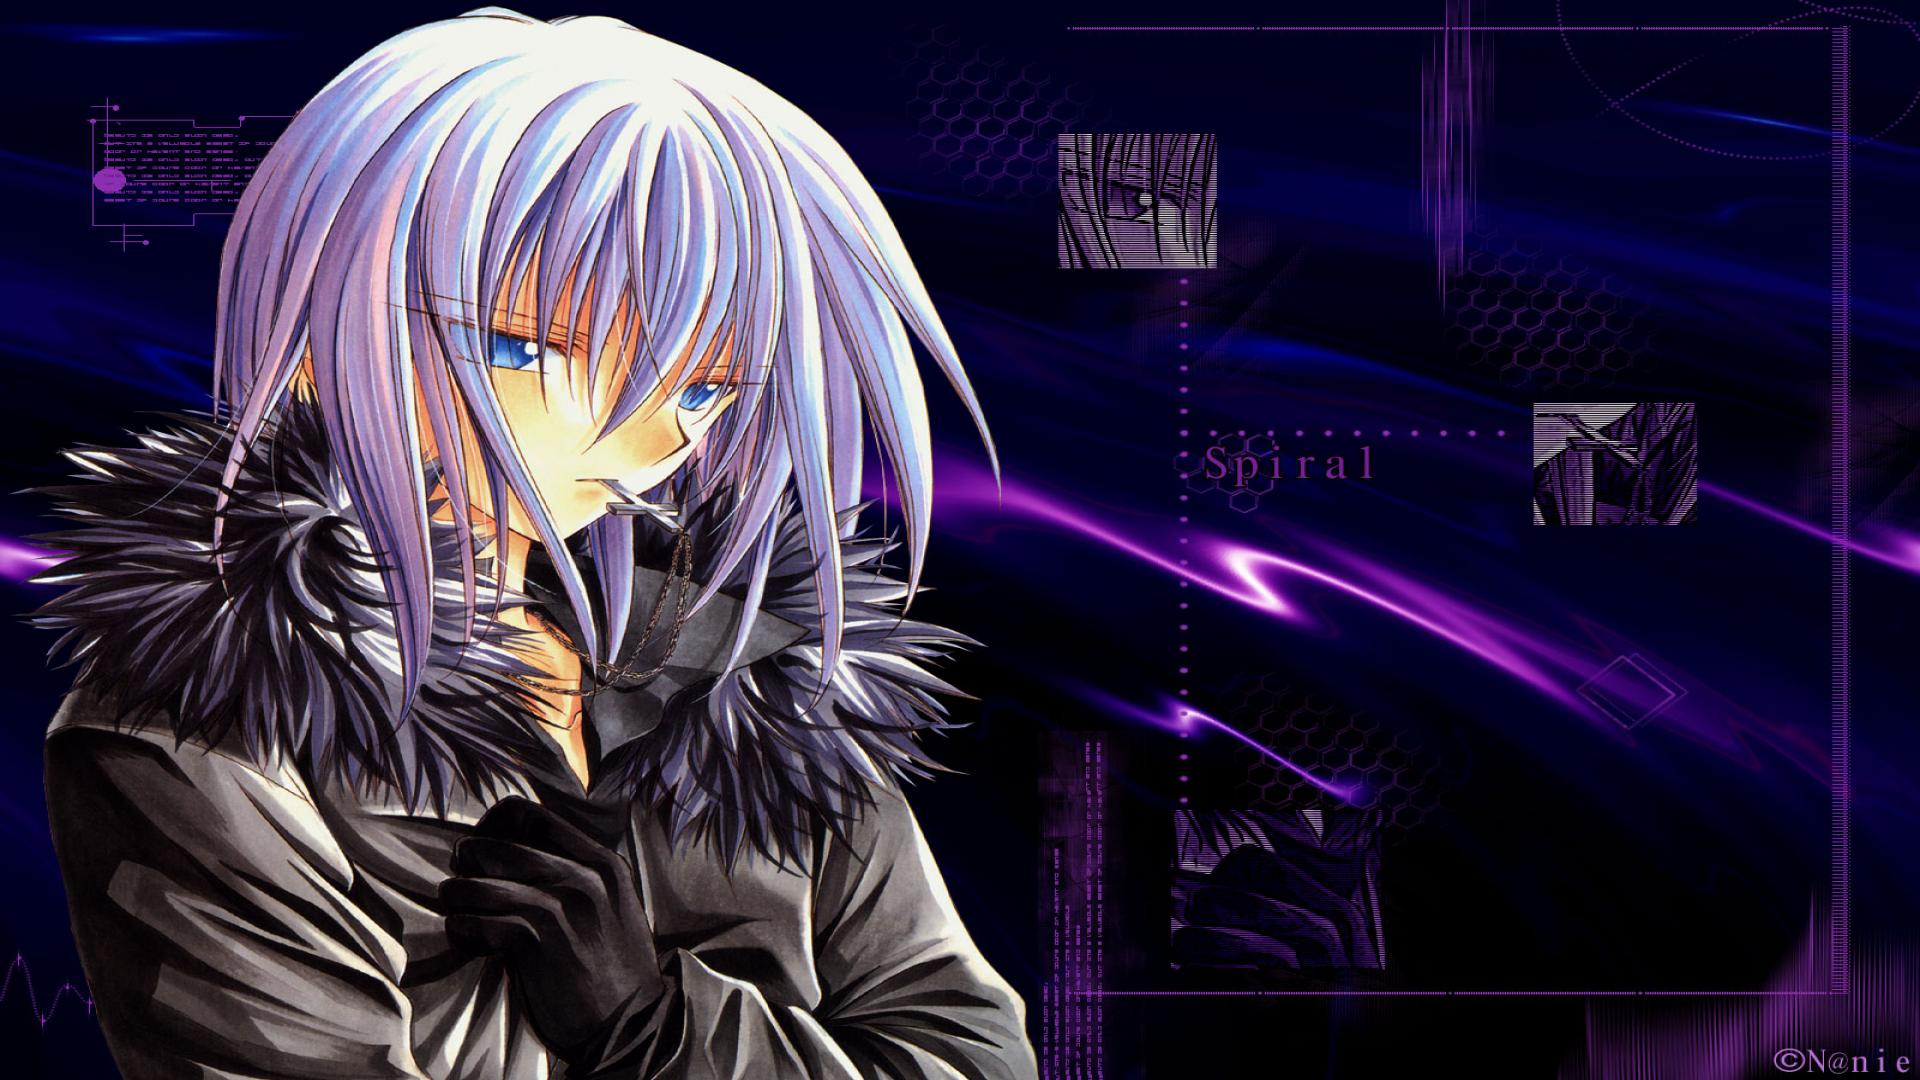  Tech Anime HD Wallpapers 1920x1080 Anime Wallpapers 1920x1080 Download 1920x1080